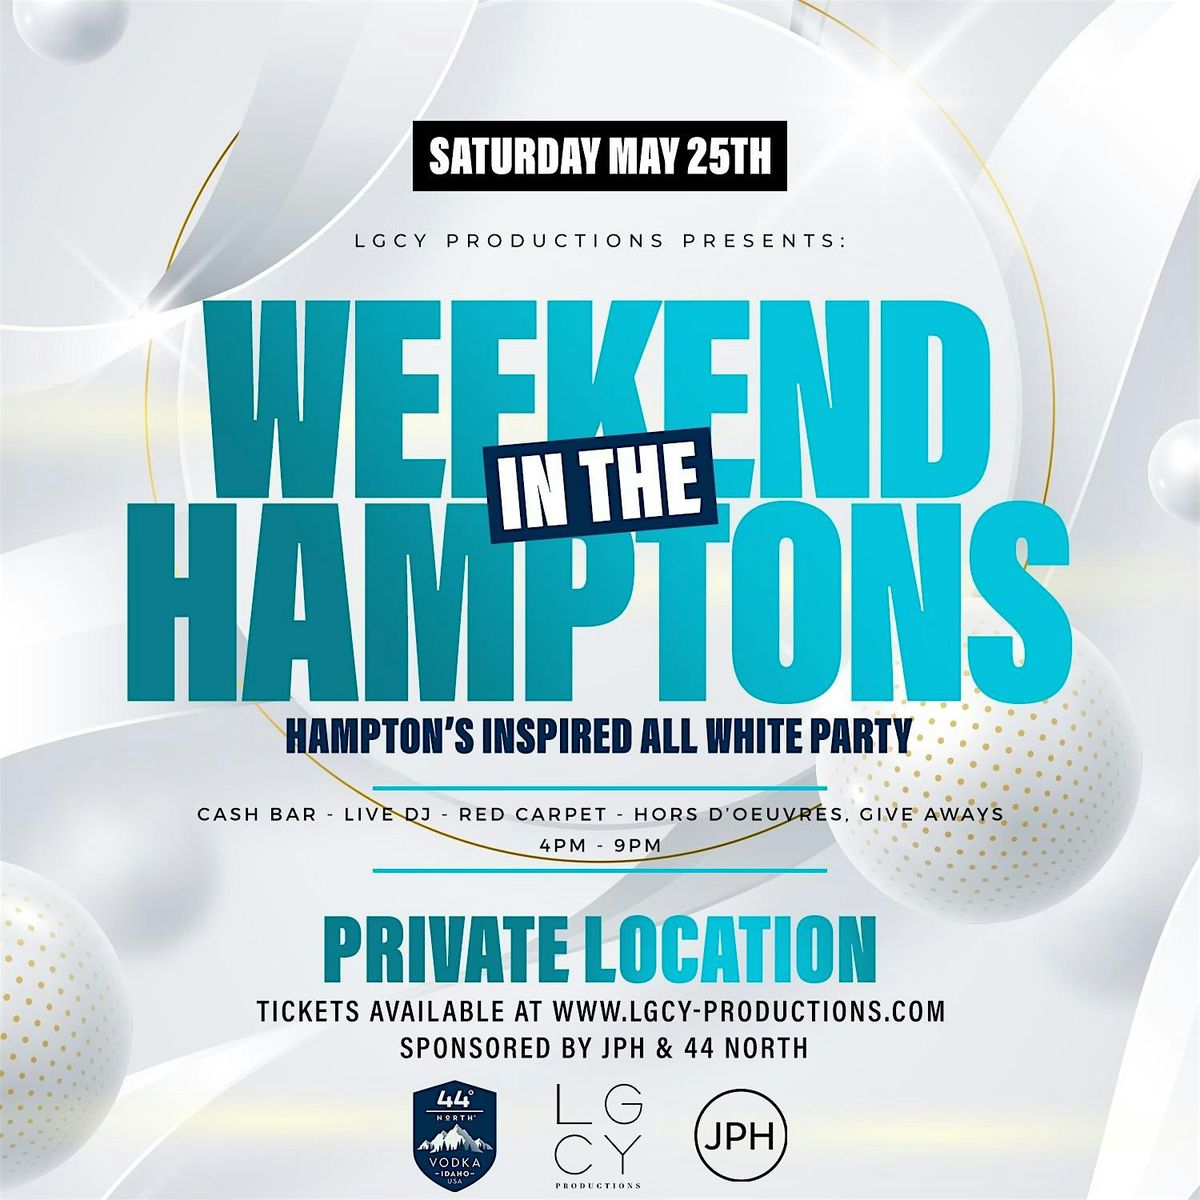 LGCY Productions presents weekend in the Hamptons.